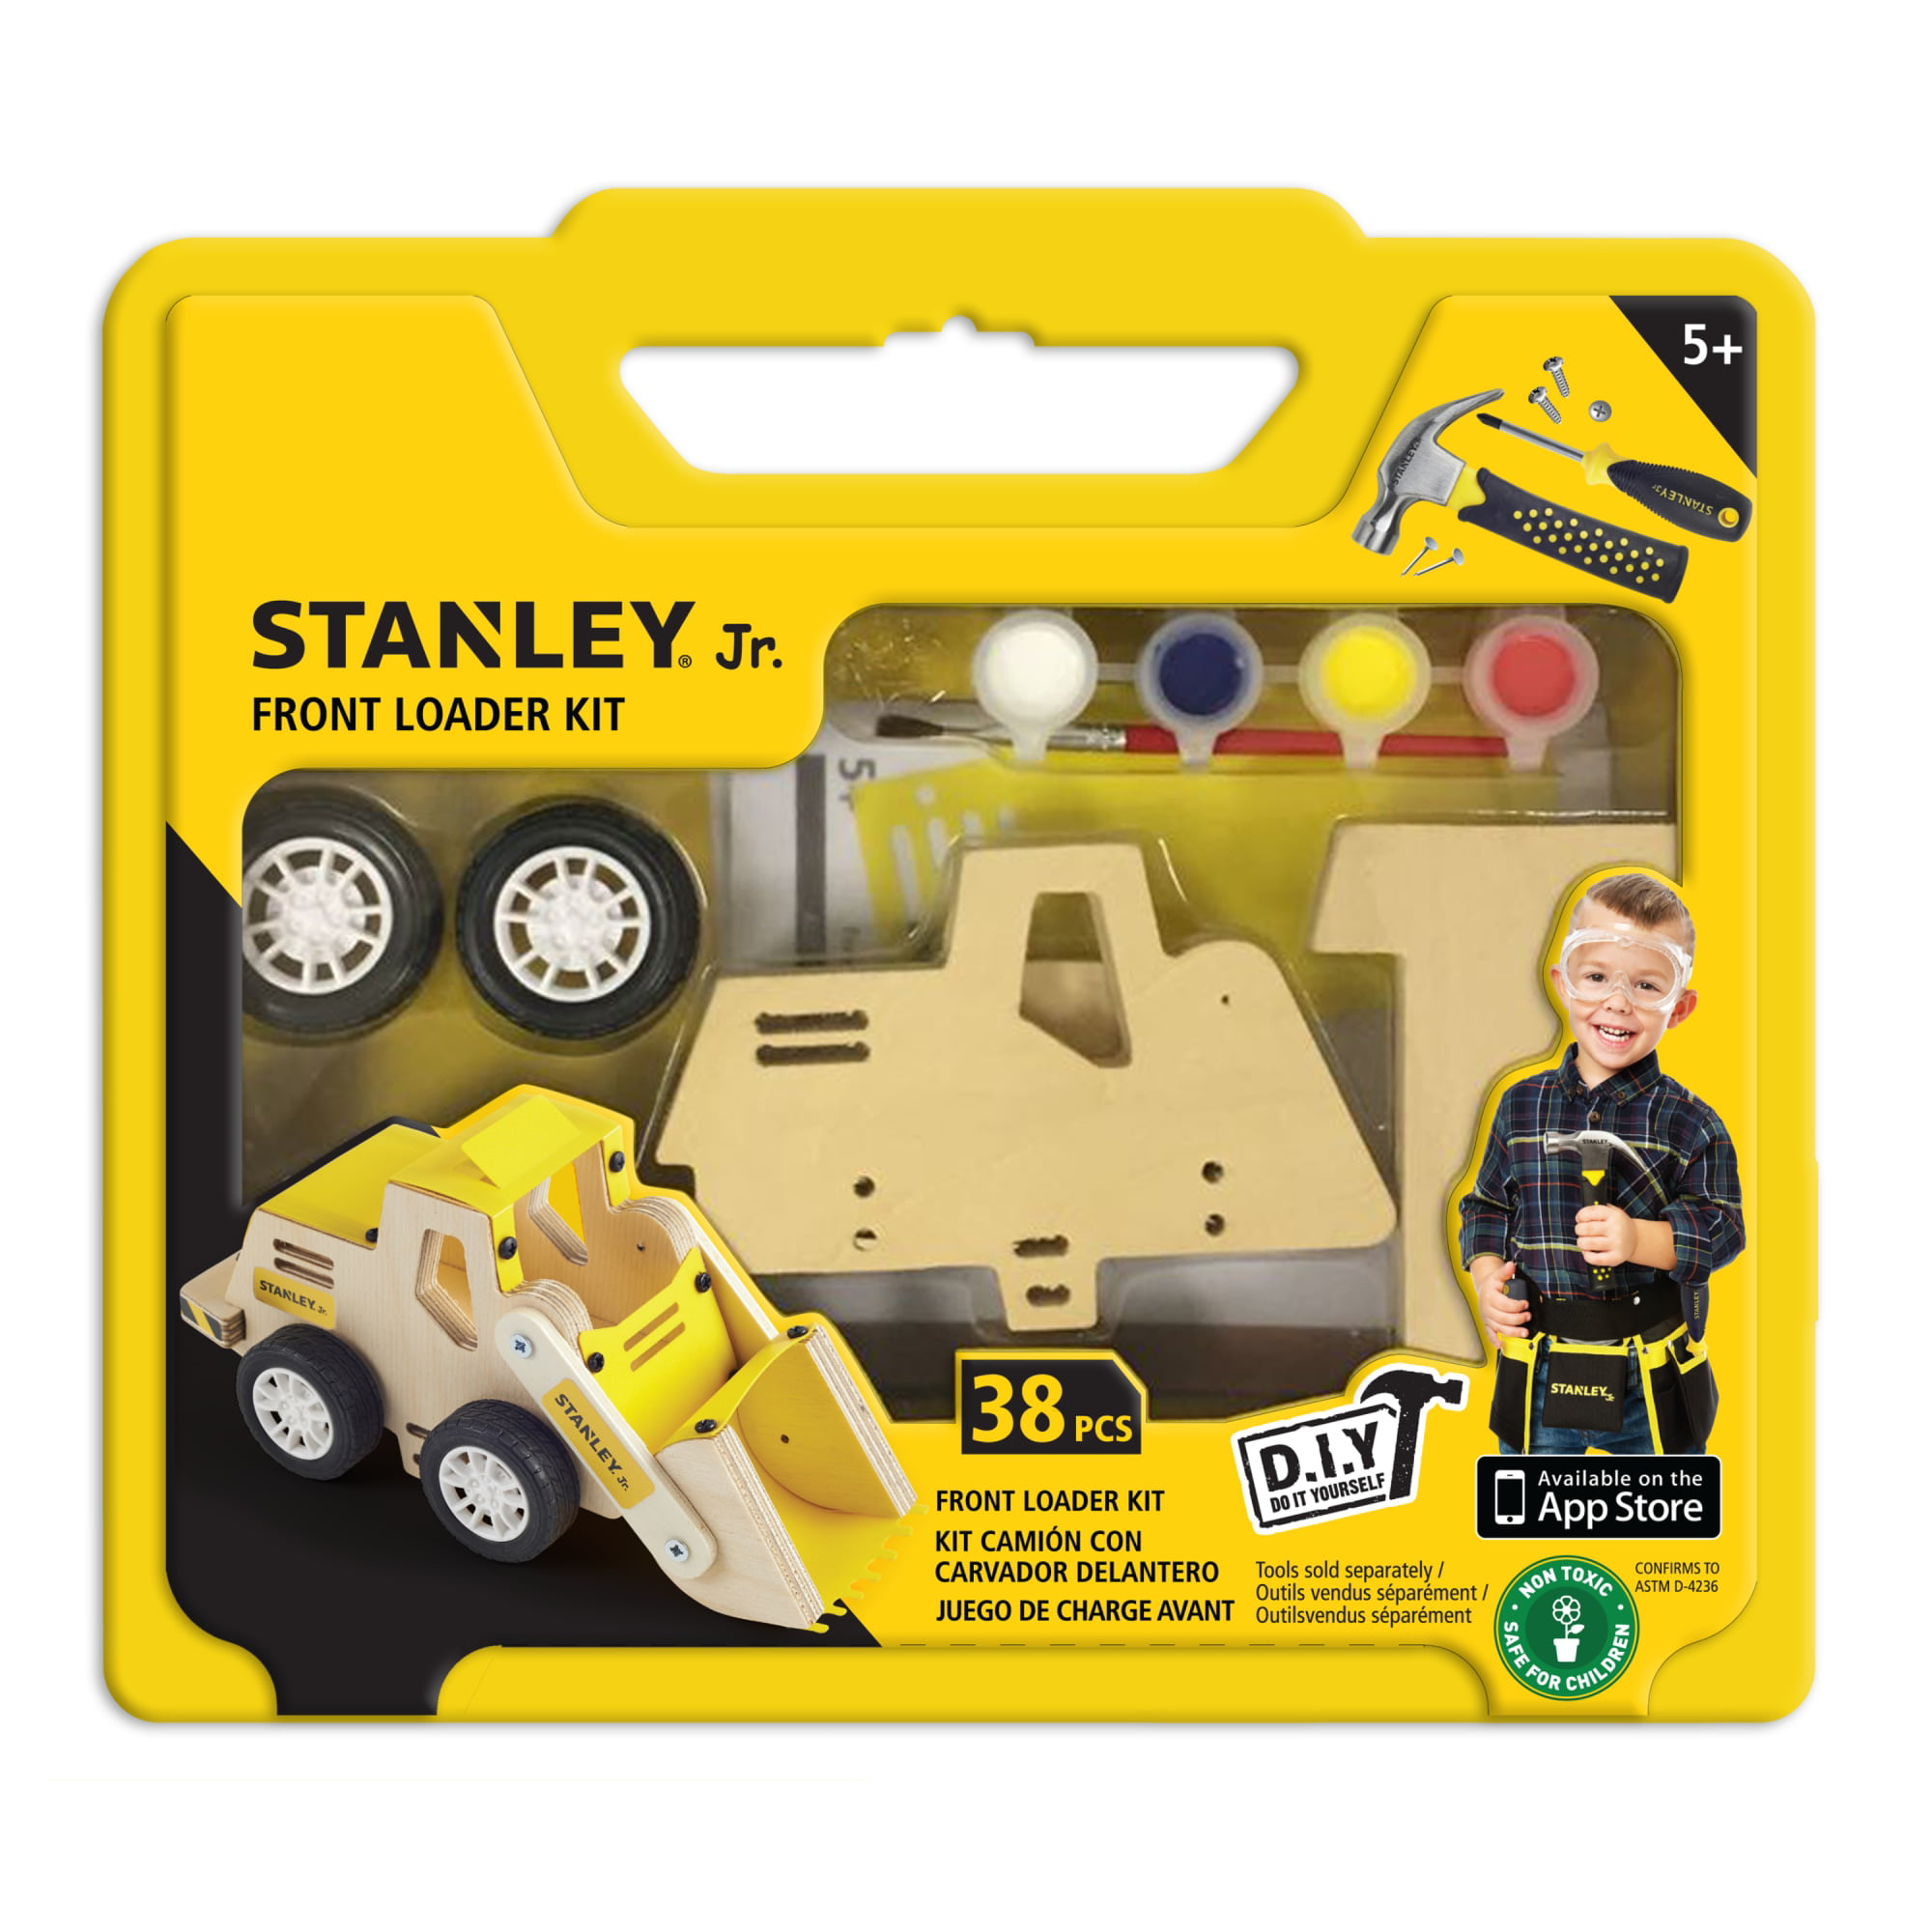 Stanley Jr. Kid's Beginner Project Kit - Complete Wood Building Set for  Ages 5+, Assembled Dimensions: 3.8-in x 5.6-in x 2.8 in the Kids Project  Kits department at